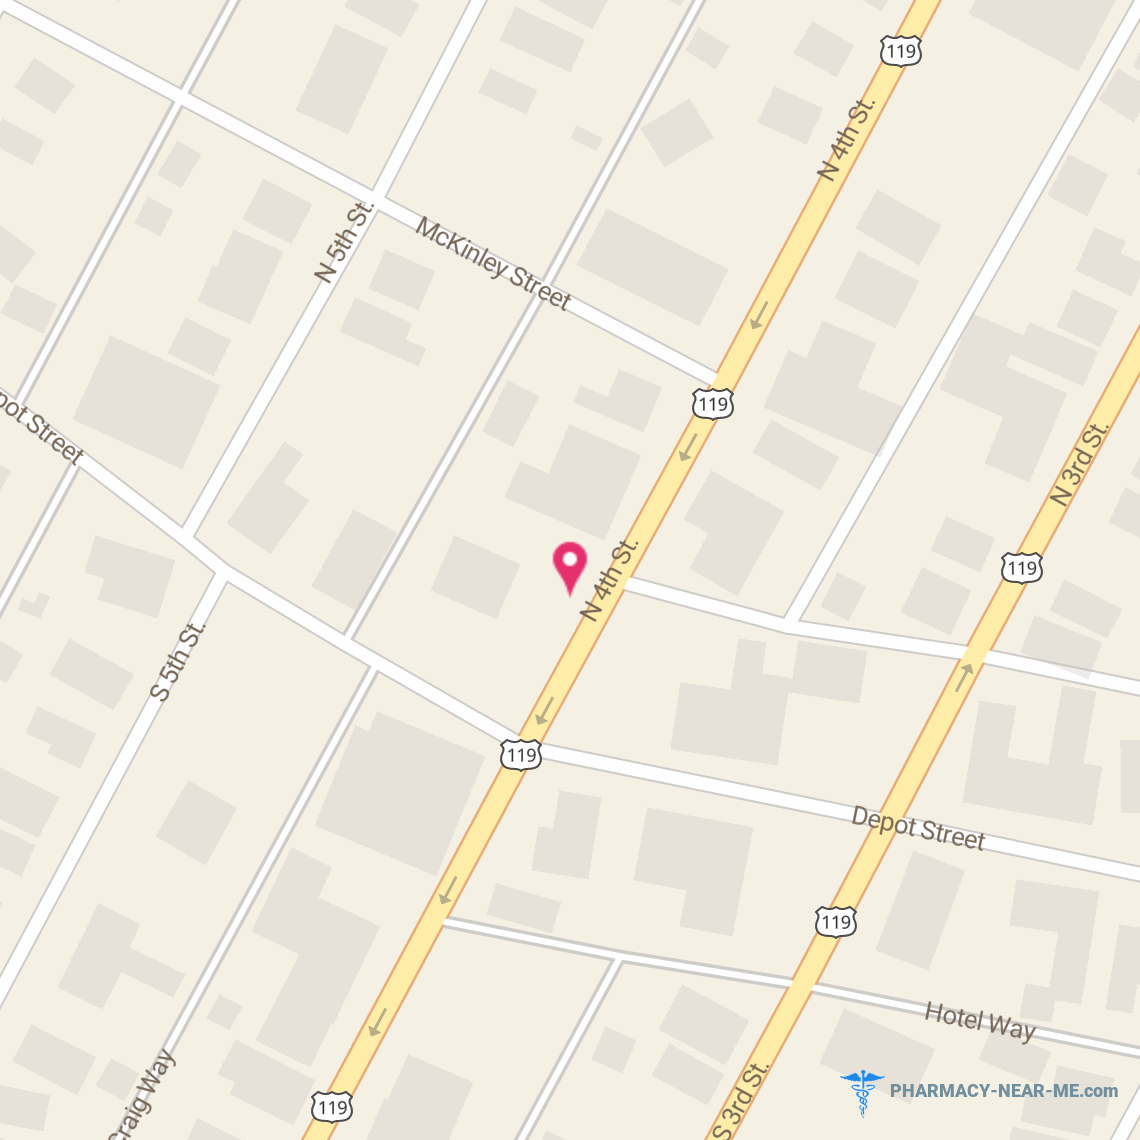 BAYERS PHARMACY - Pharmacy Hours, Phone, Reviews & Information: 1 N 4th St, Youngwood, Pennsylvania 15697, United States